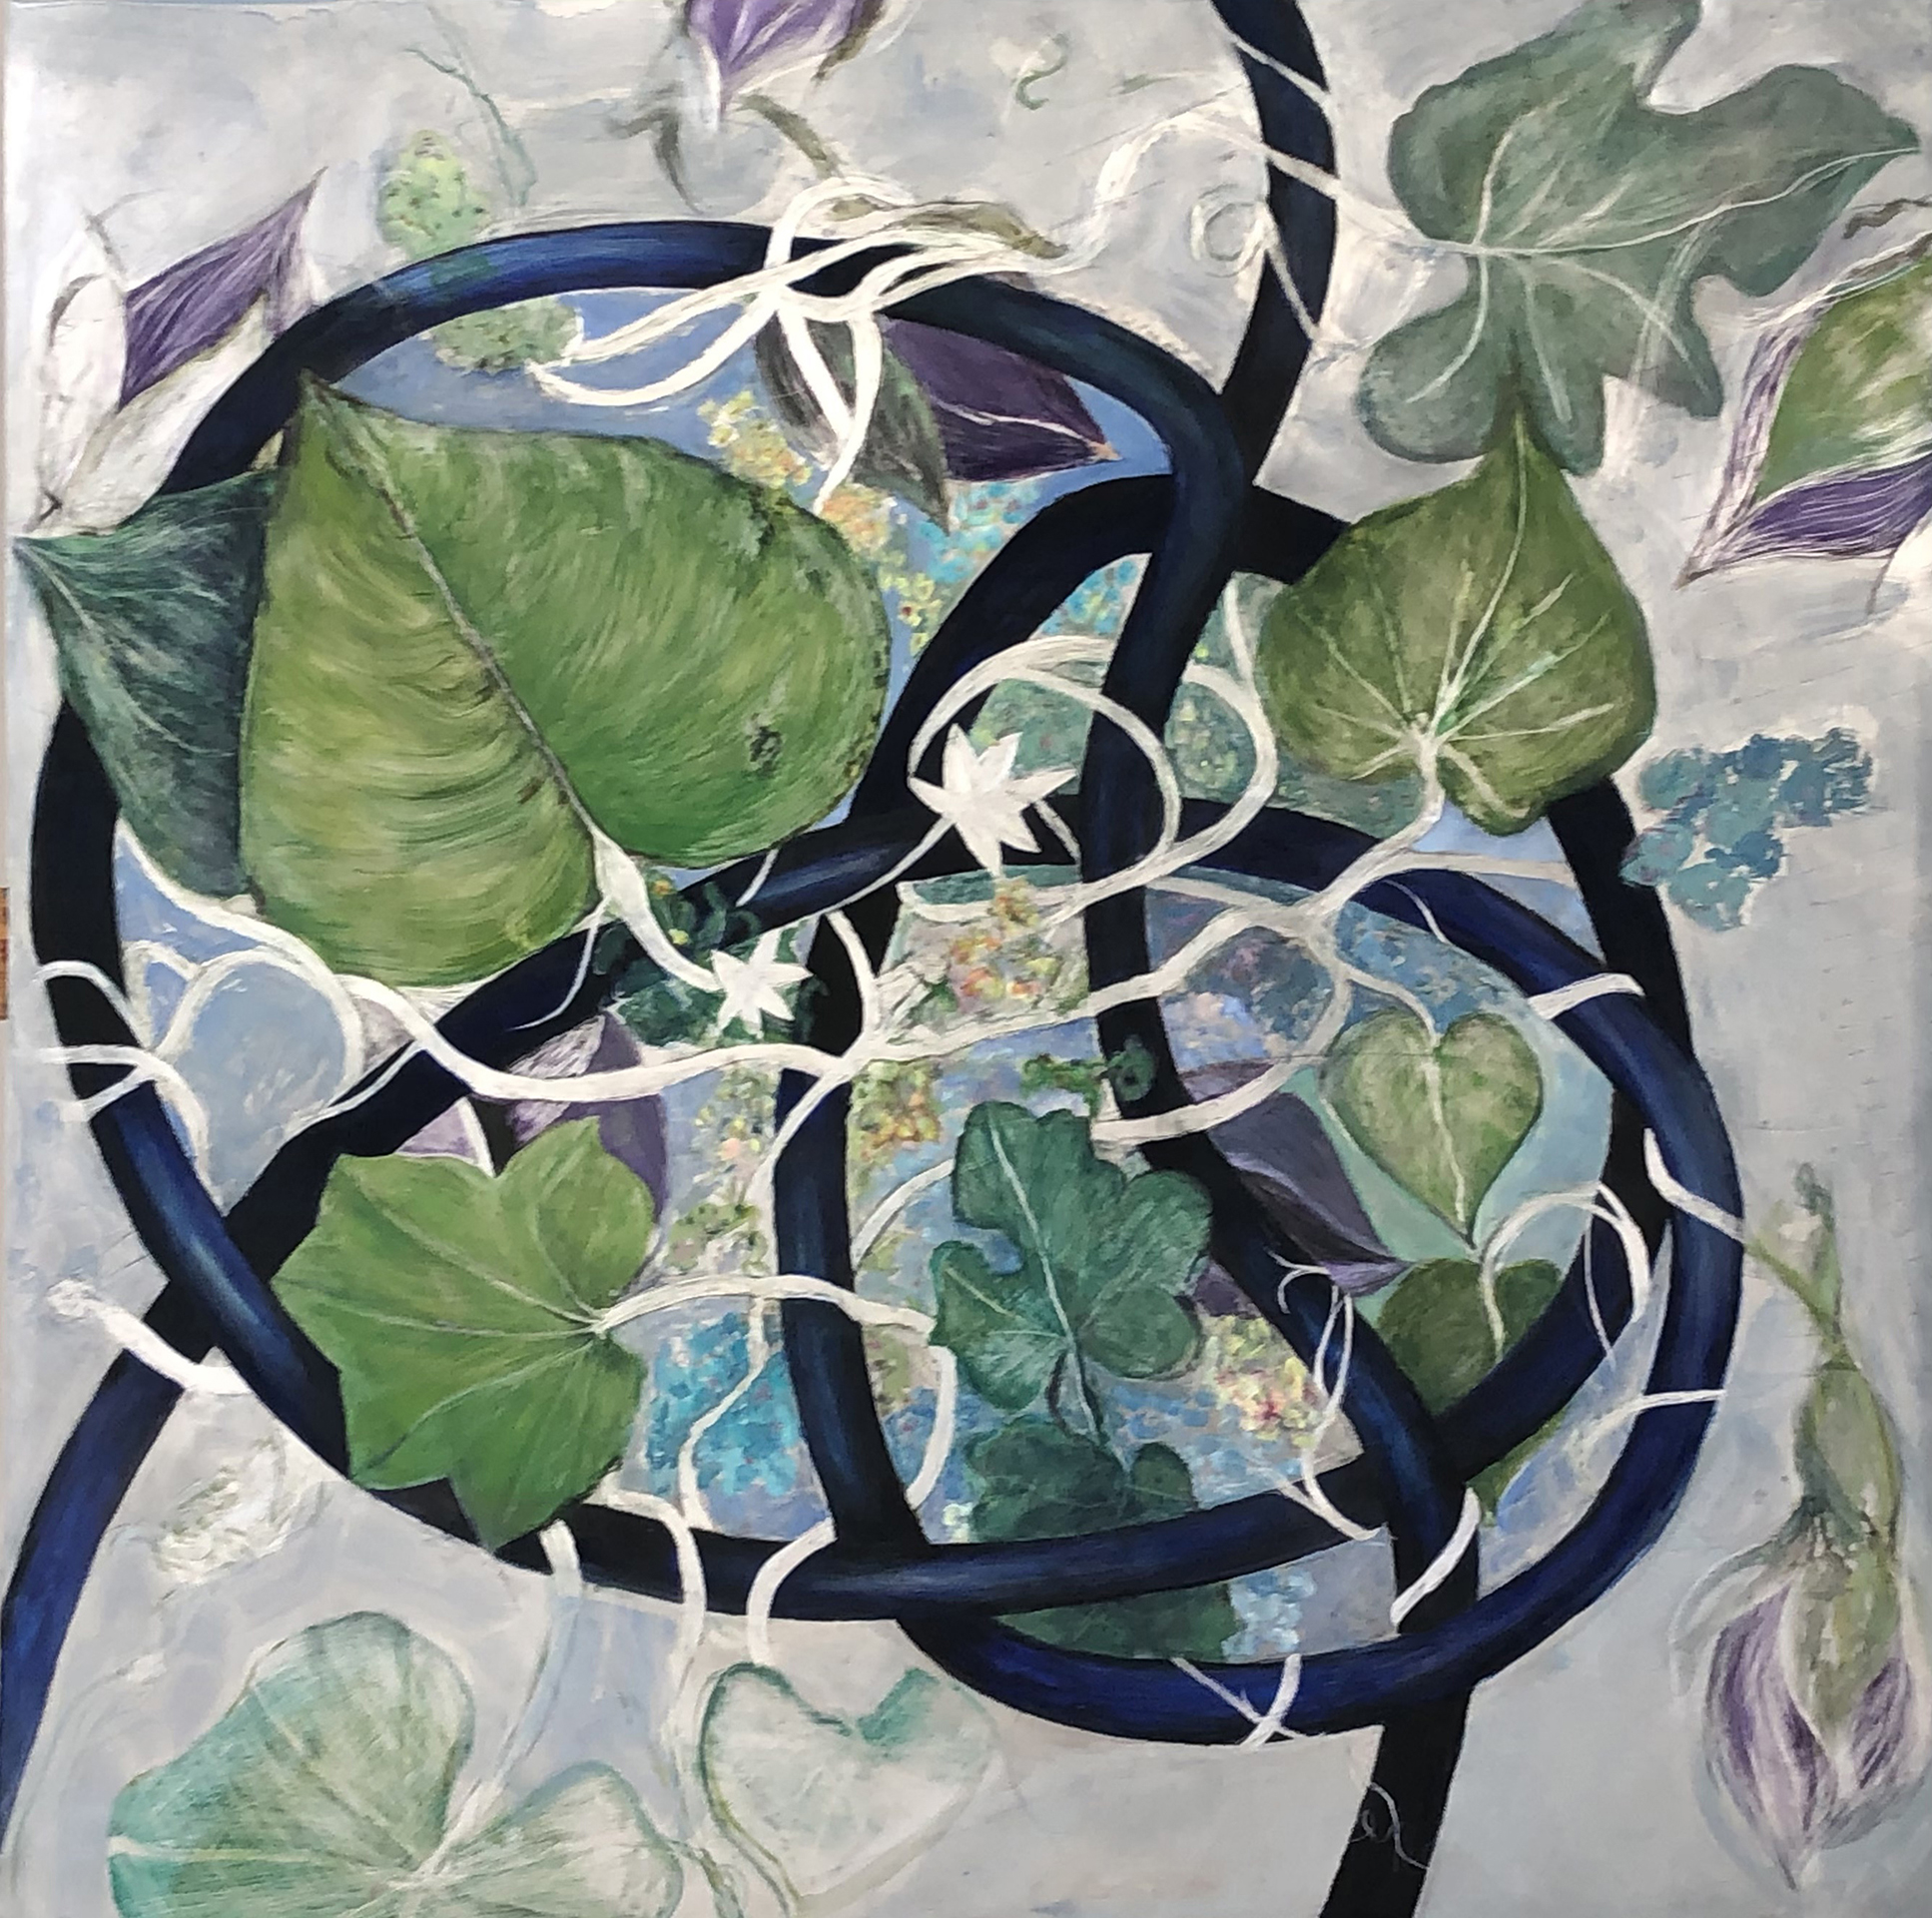  "Knots and Vines"oil paint on worked aluminum 36"x36 22